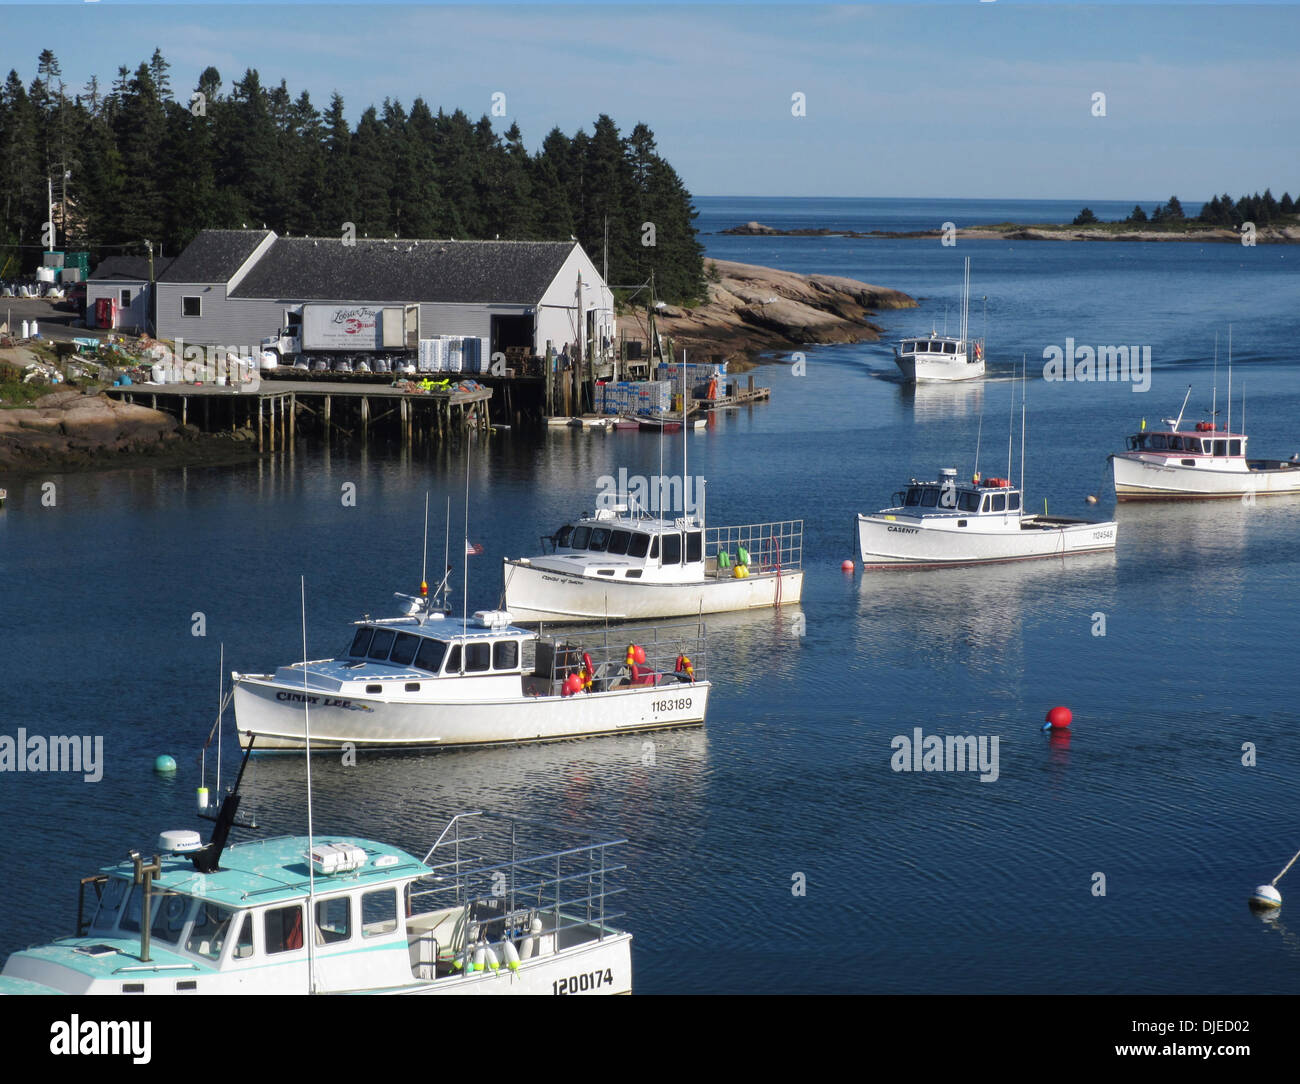 Traditional New England lobster boats moored on a cal sunny Sunday in Corea Maine, USA Stock Photo